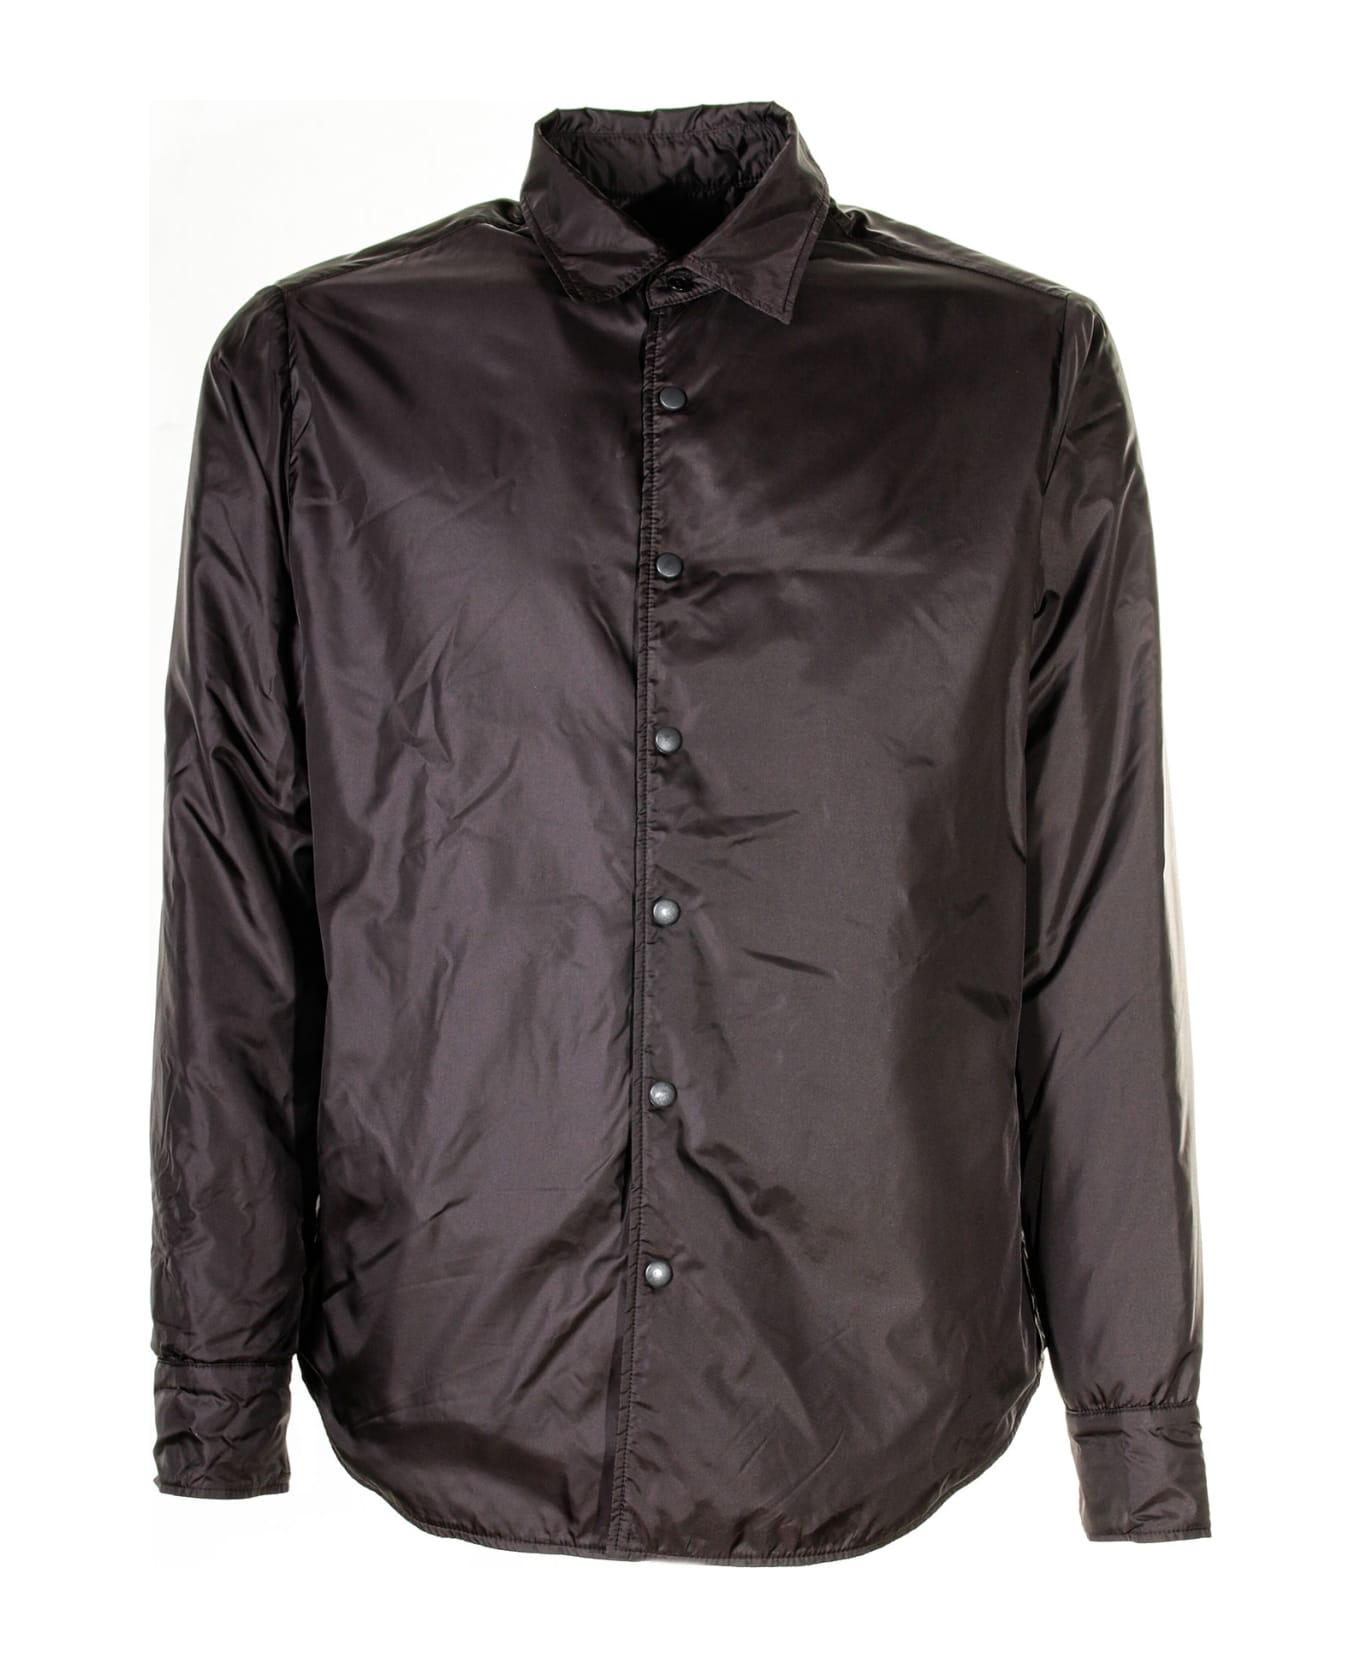 Aspesi Shirt Jacket With Buttons - BROWN MARRONE シャツ